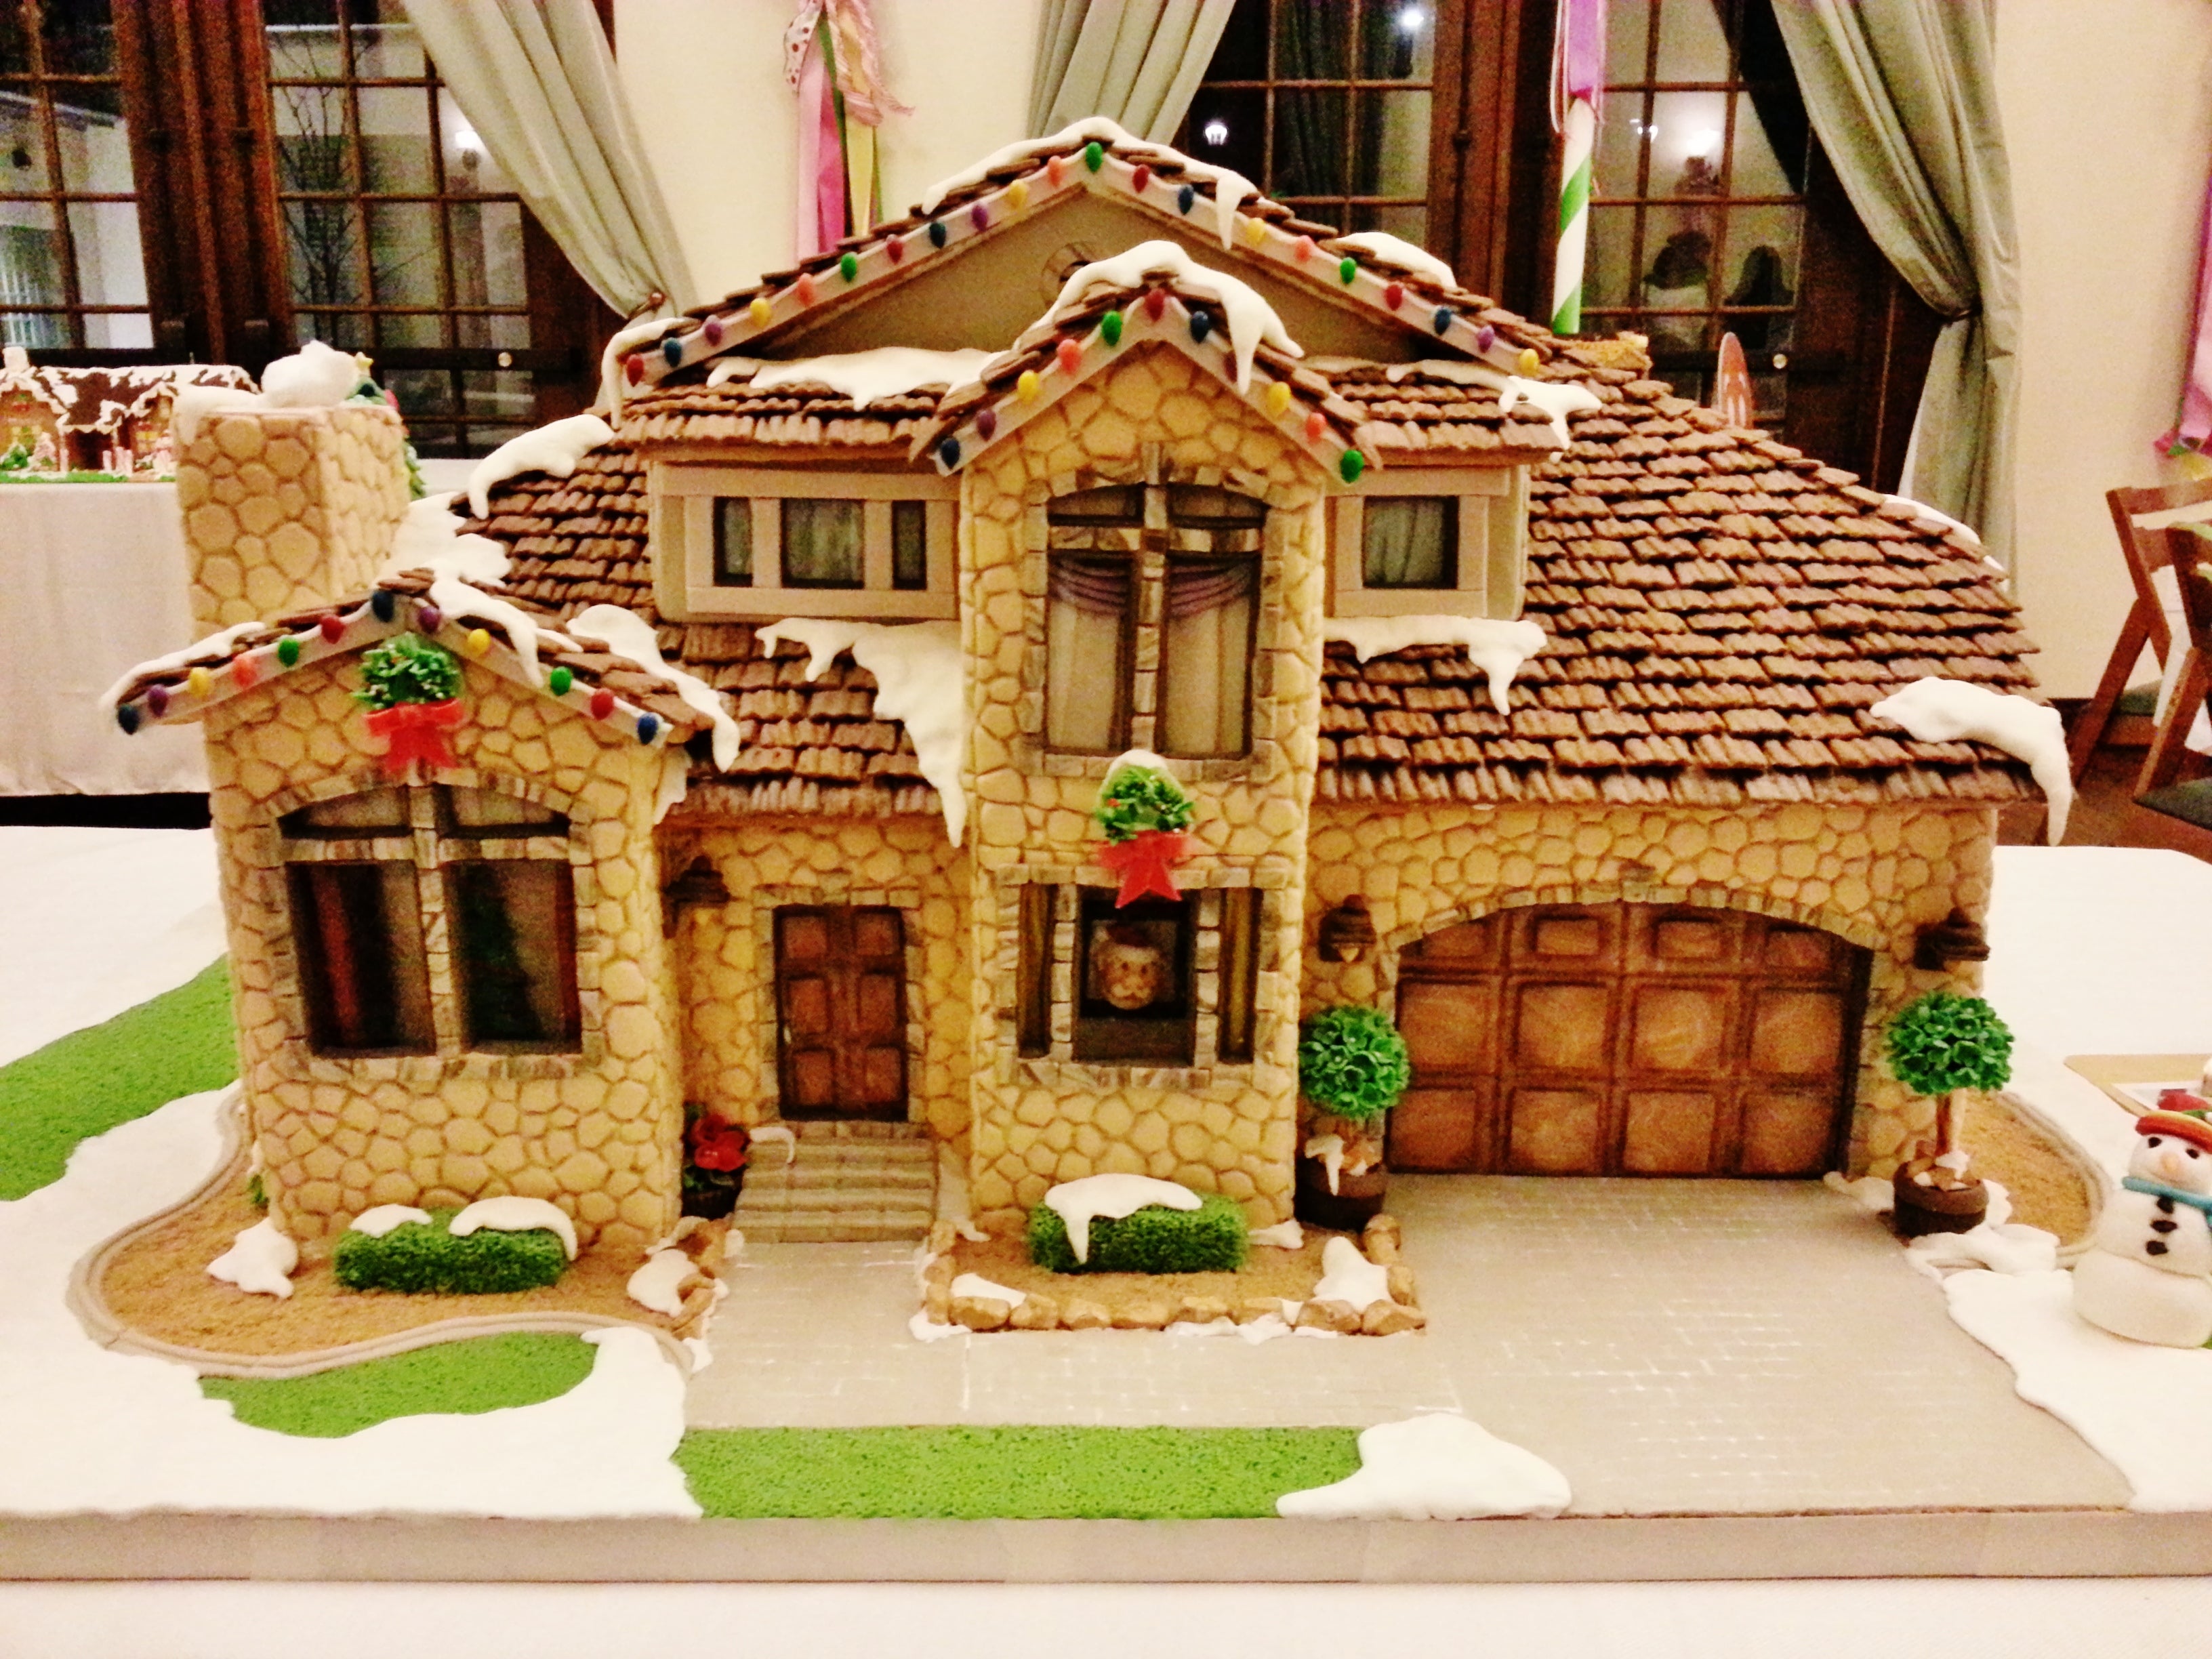 12 Best Gingerbread Houses & Castles for the Holidays